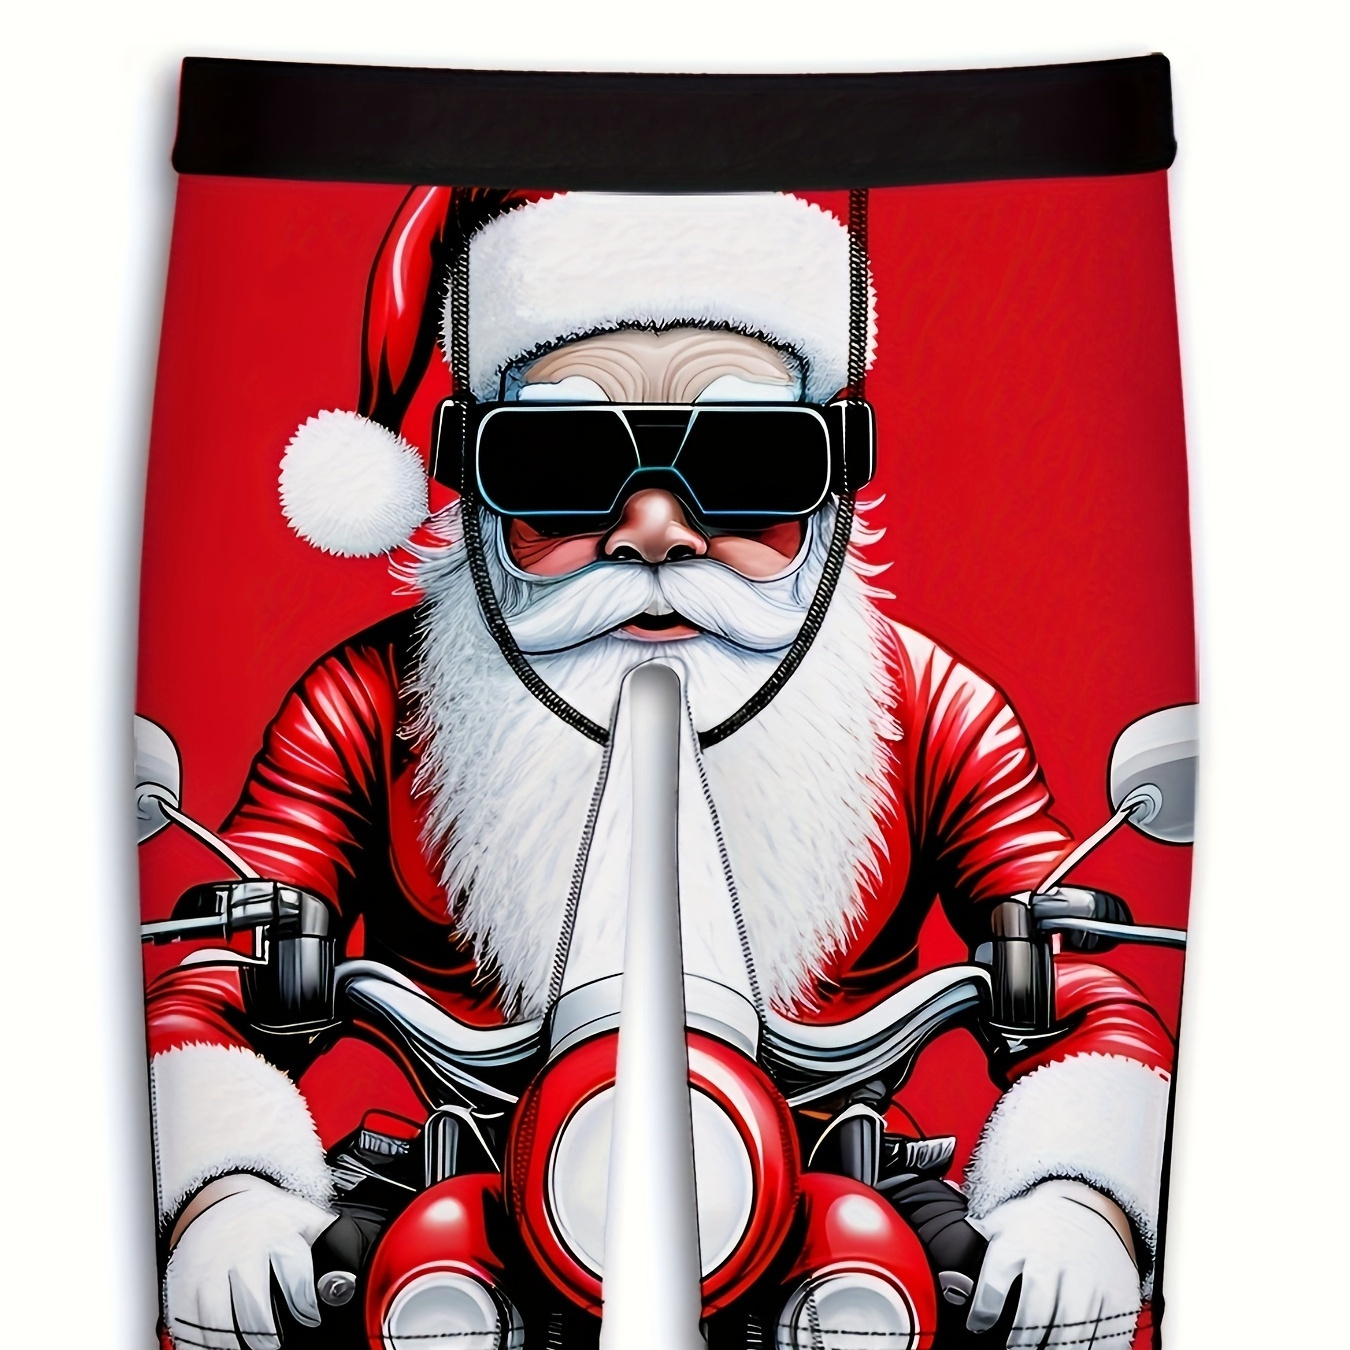 

Christmas Santa Claus Print Men's Graphic Long Boxer Briefs Shorts, Breathable Comfy Quick Drying Stretchy Boxer Trunks, Sports Trunks, Swim Trunks For Beach Pool, Men's Novelty Underwear